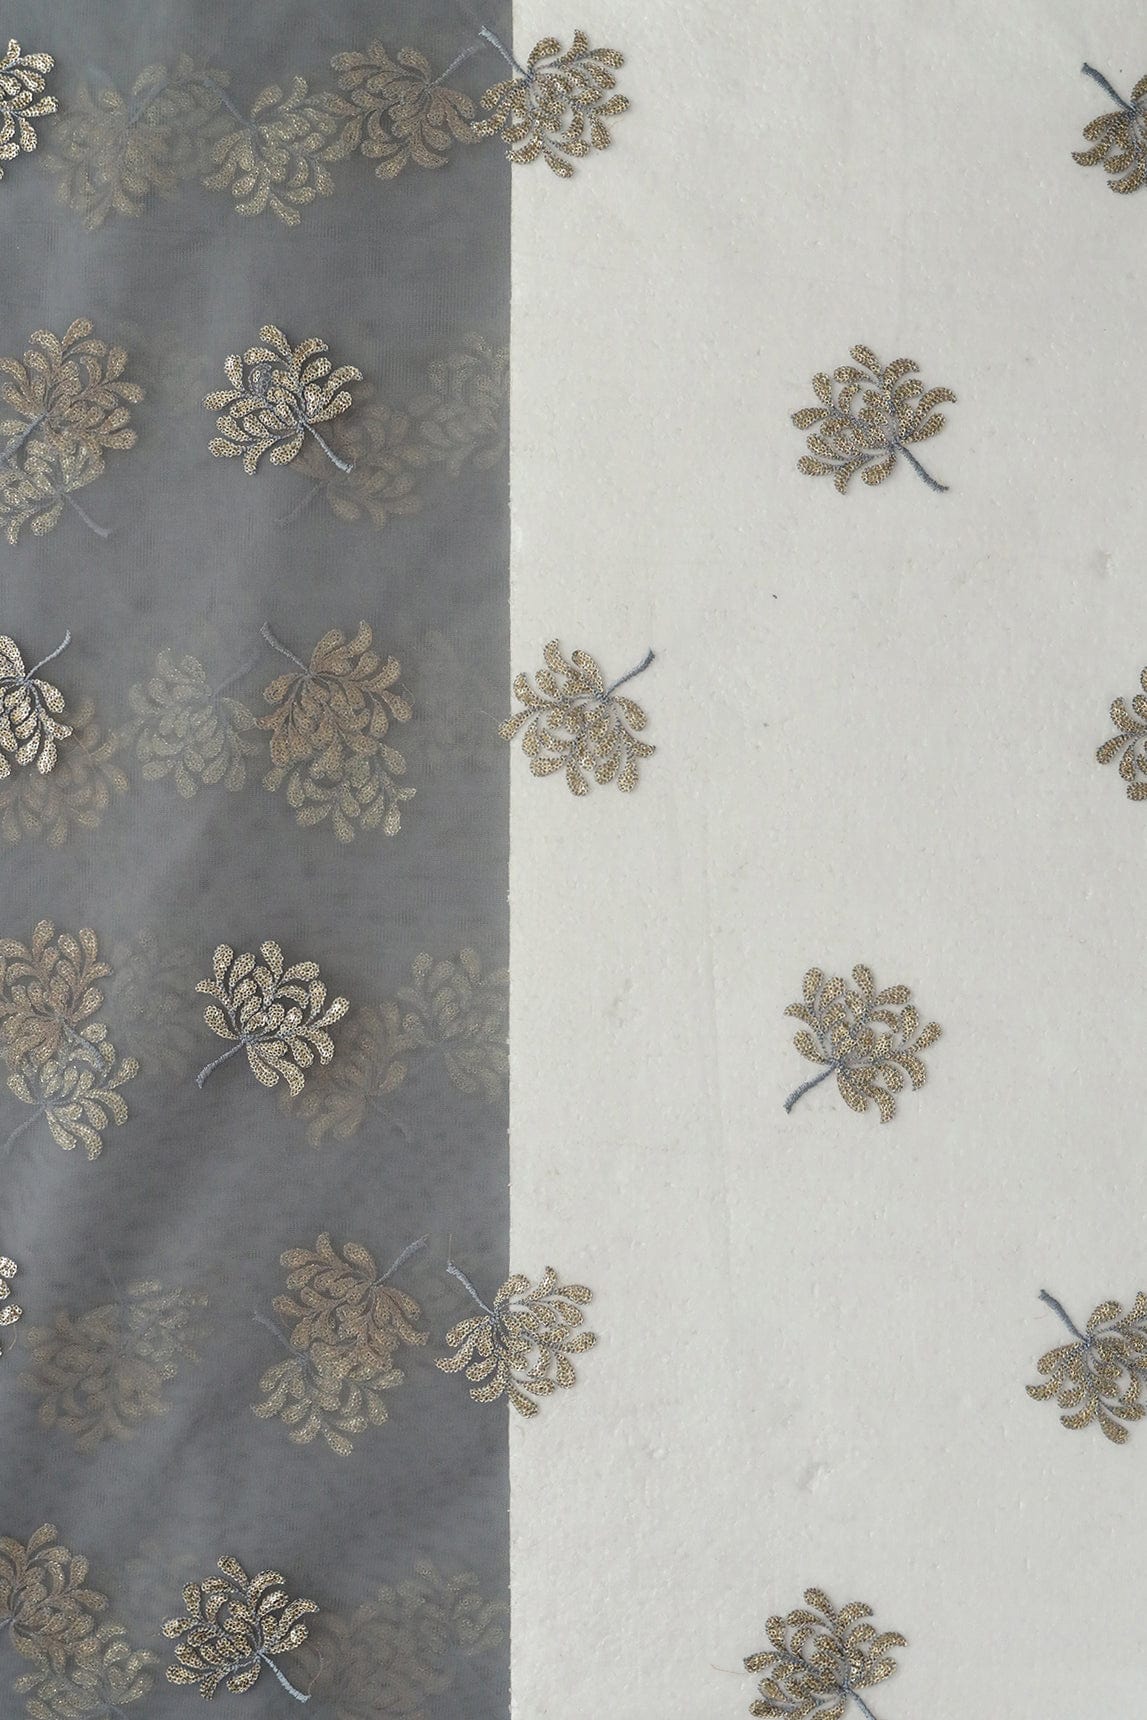 doeraa Embroidery Fabrics Grey Thread With Gold Sequins Beautiful Floral Embroidery Work On Grey Soft Net Fabric